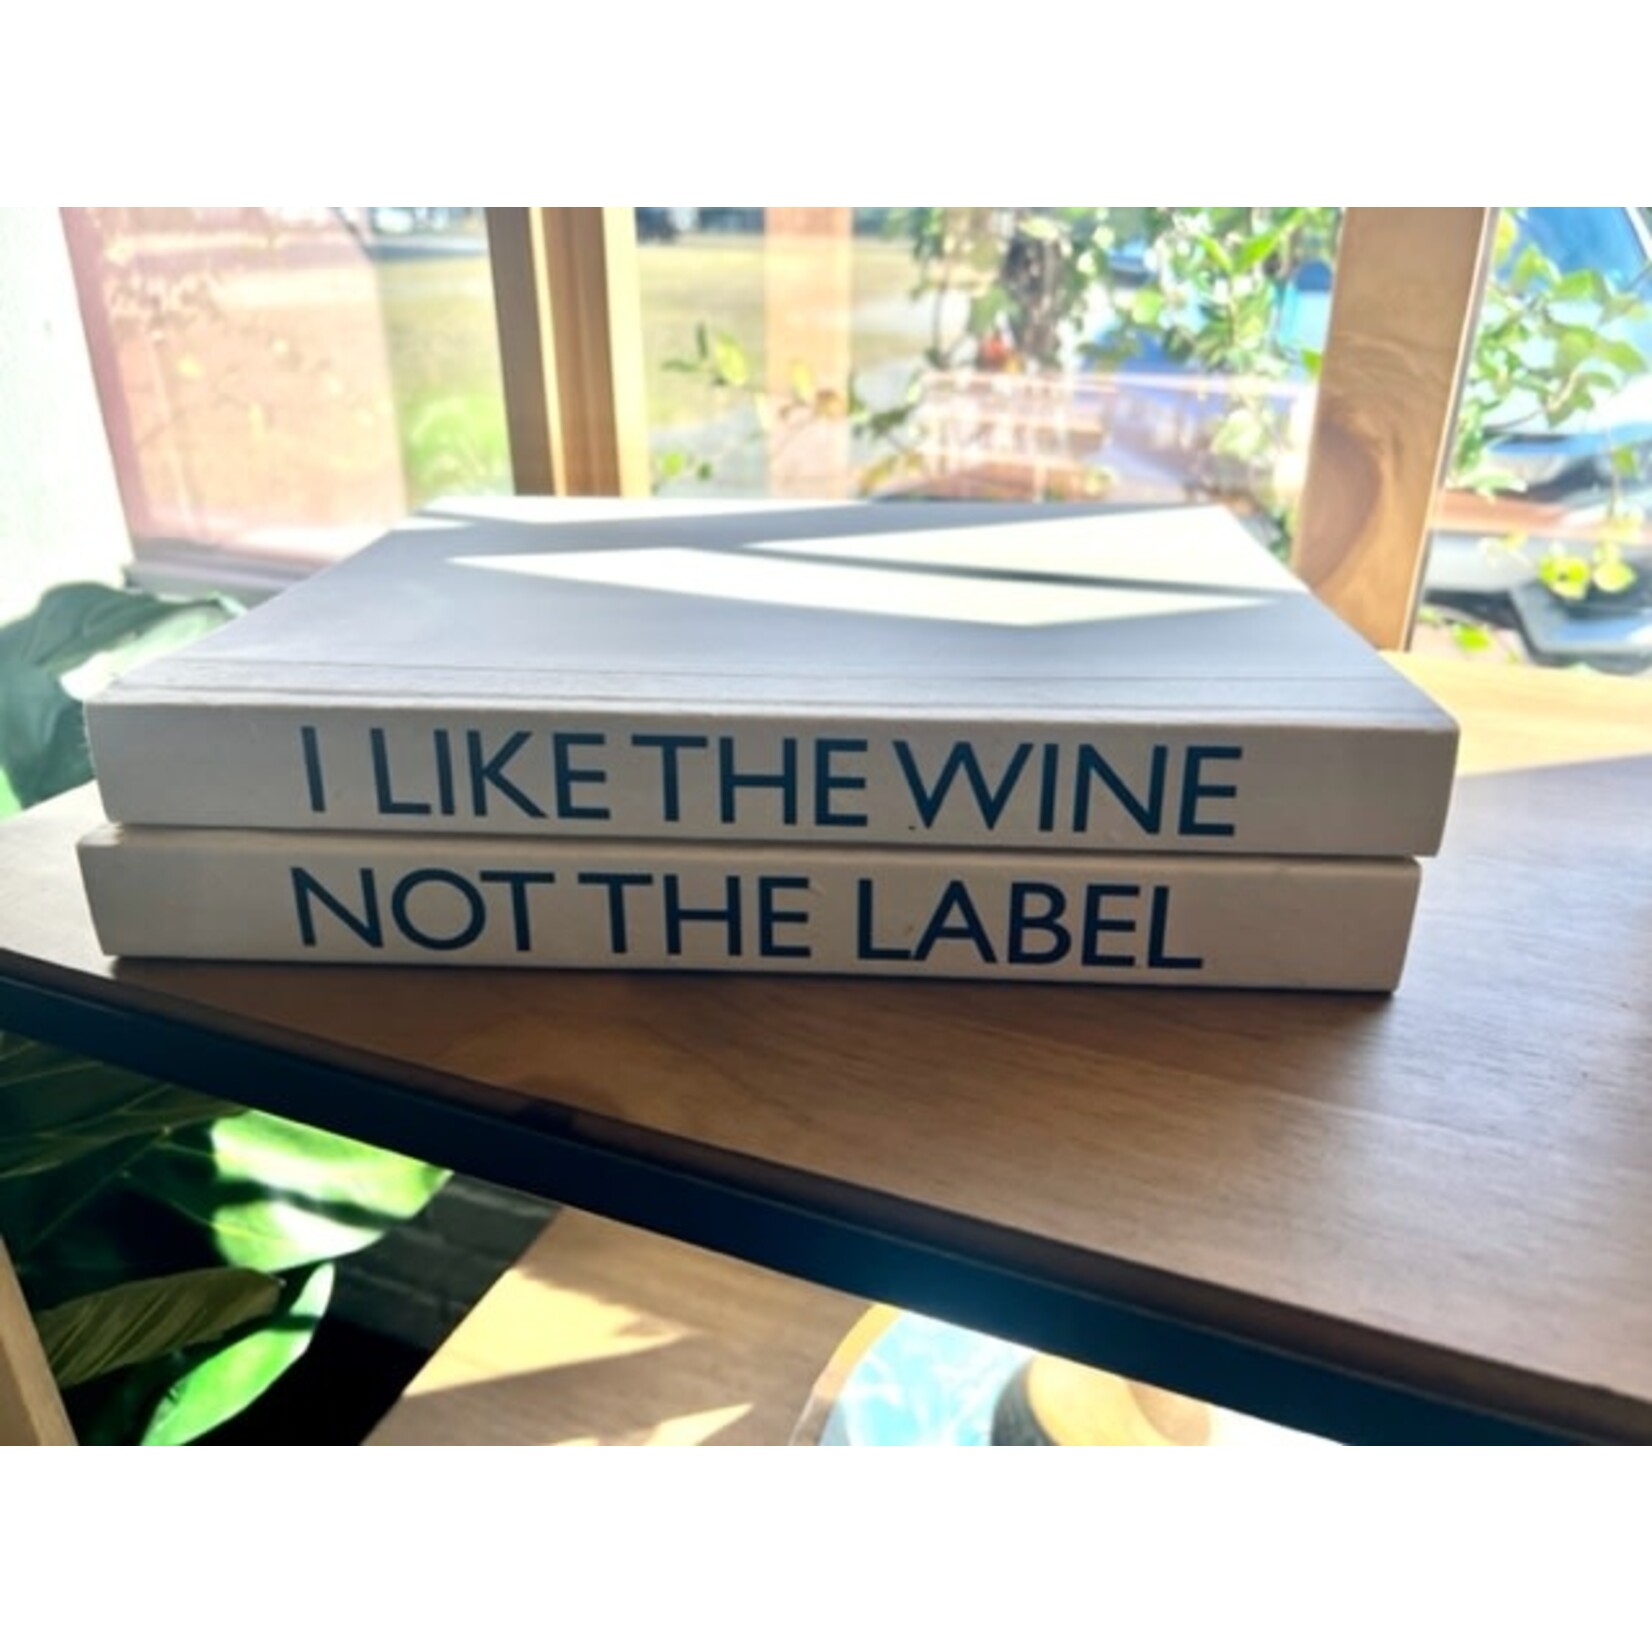 Mickler & Co. "I Like The Wine, Not The Label" Decorative Book Stack